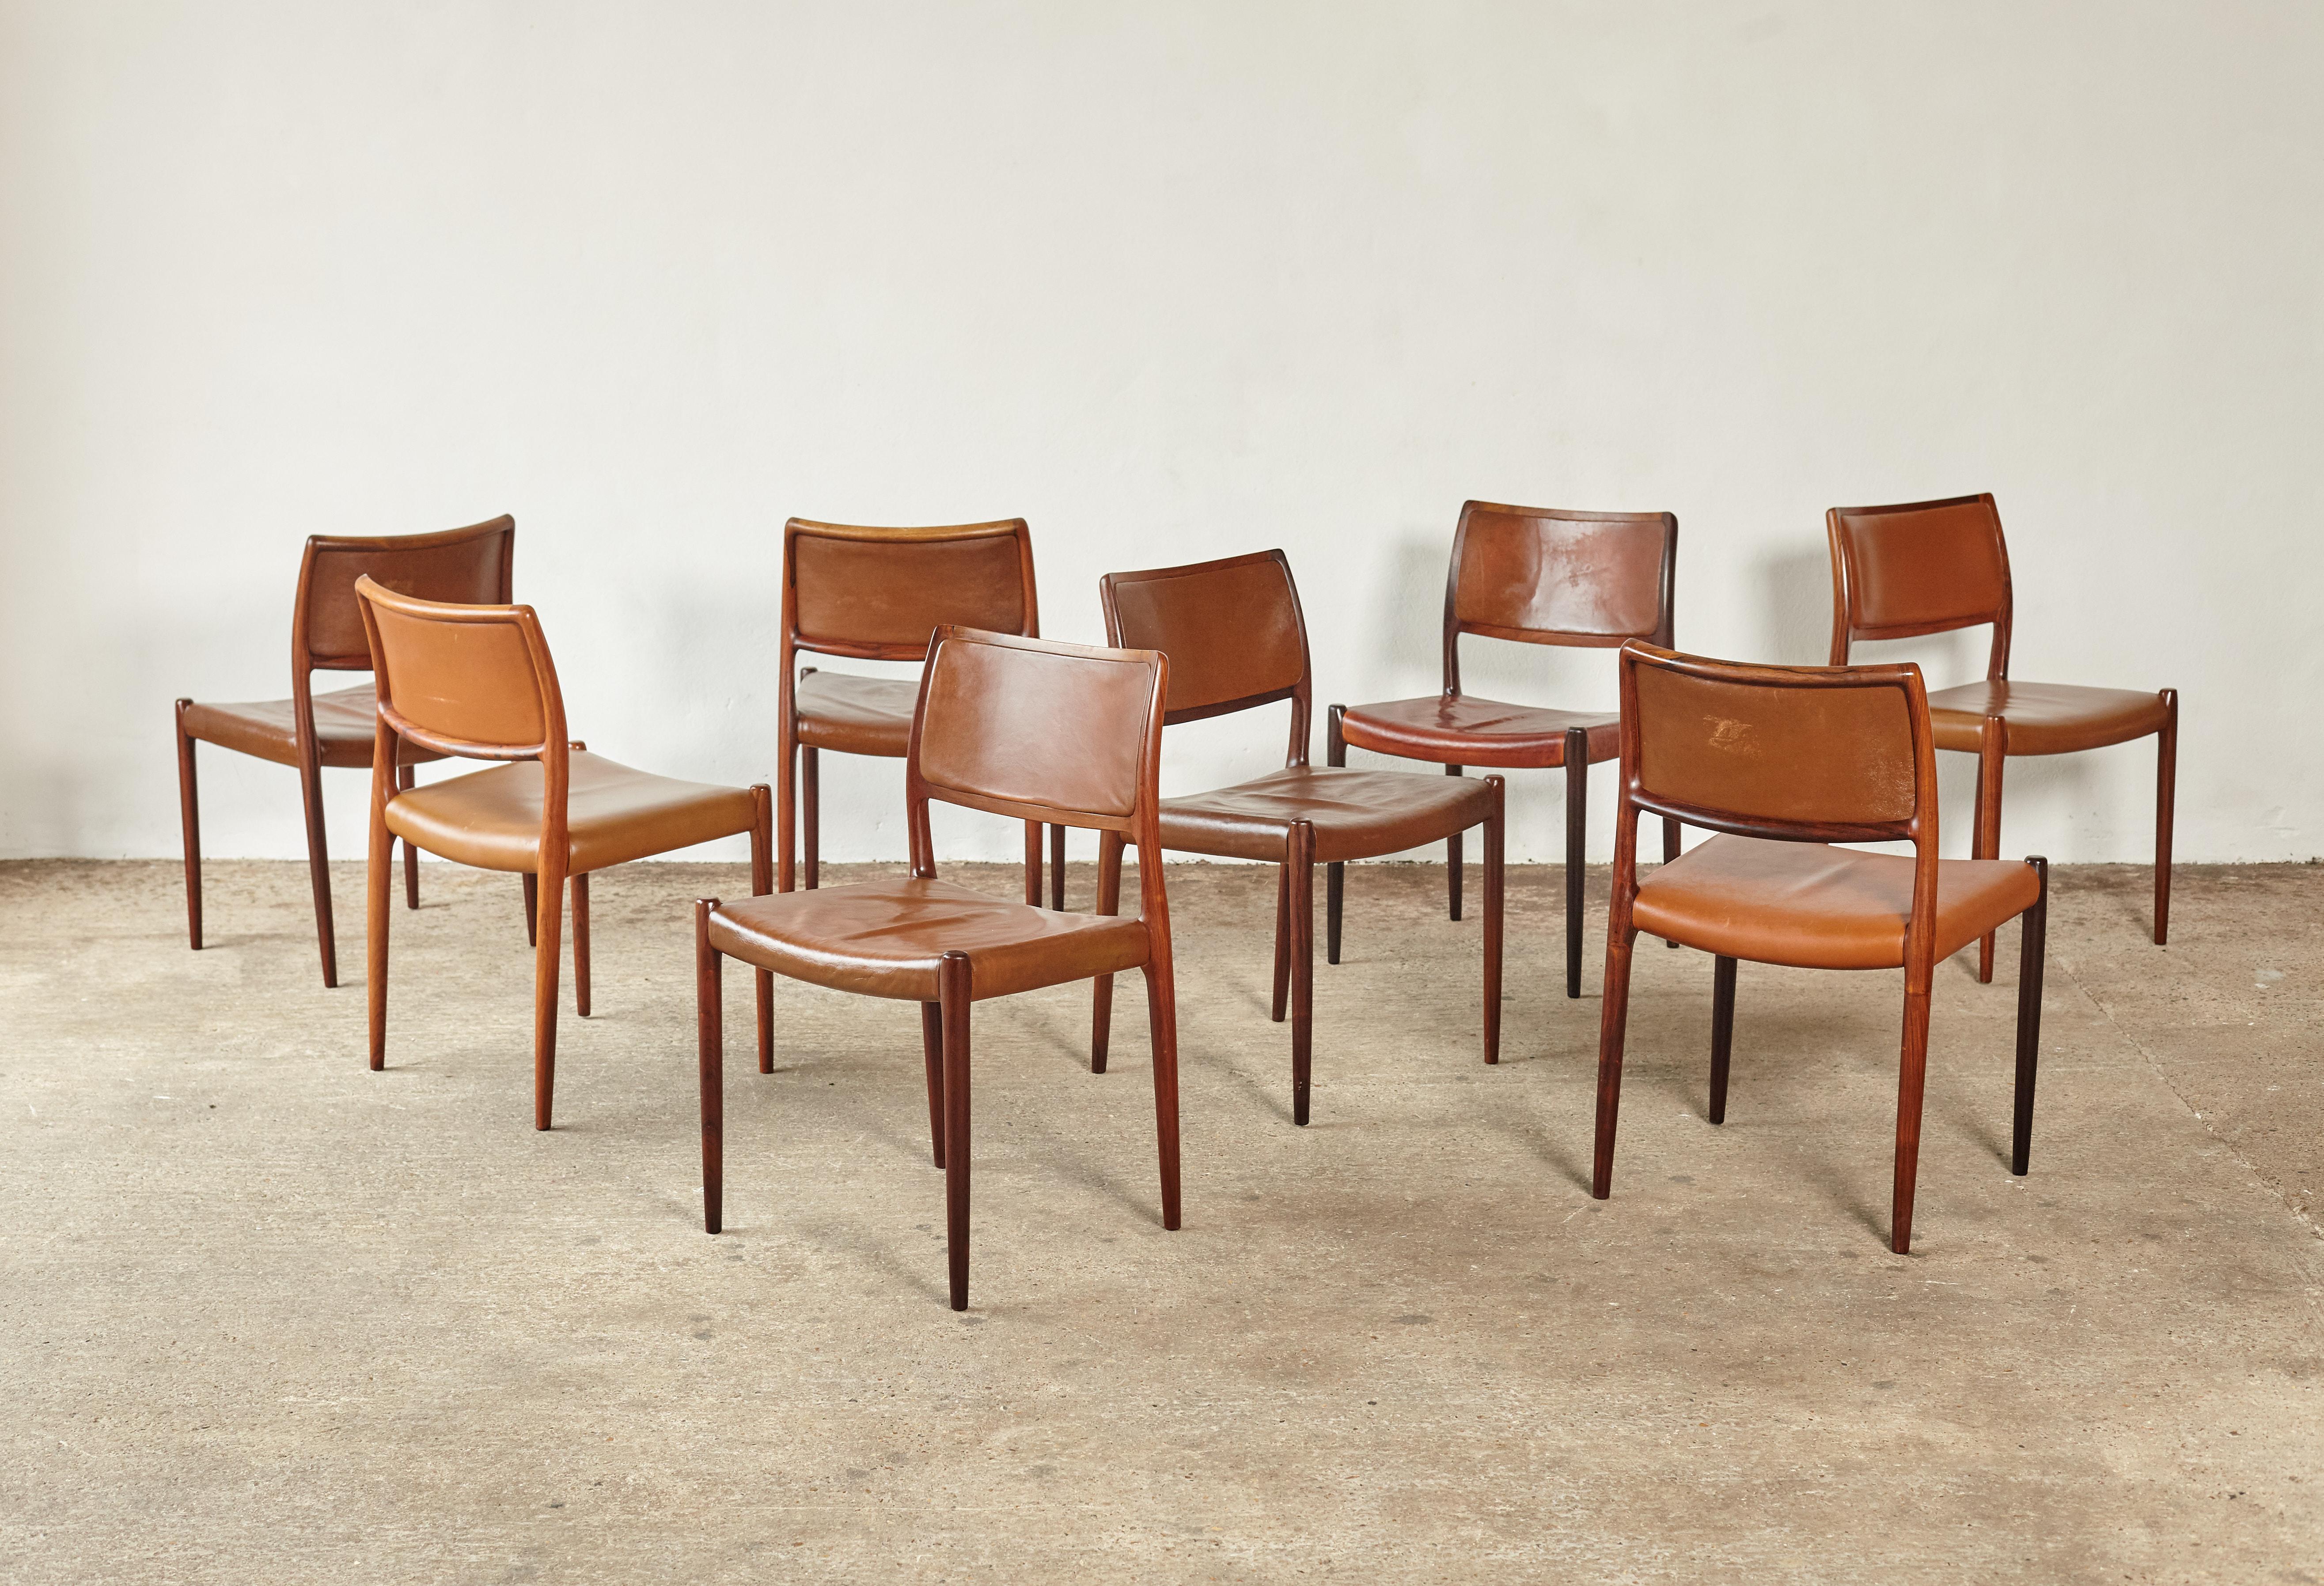 Set of eight rosewood Niels O. Møller model 80 dining chairs by J.L Møller, Denmark, 1960s. The rosewood frames are in excellent condition with a wonderful grain. Stamped with makers mark. Brown leather / vinyl seat covers are various shades of